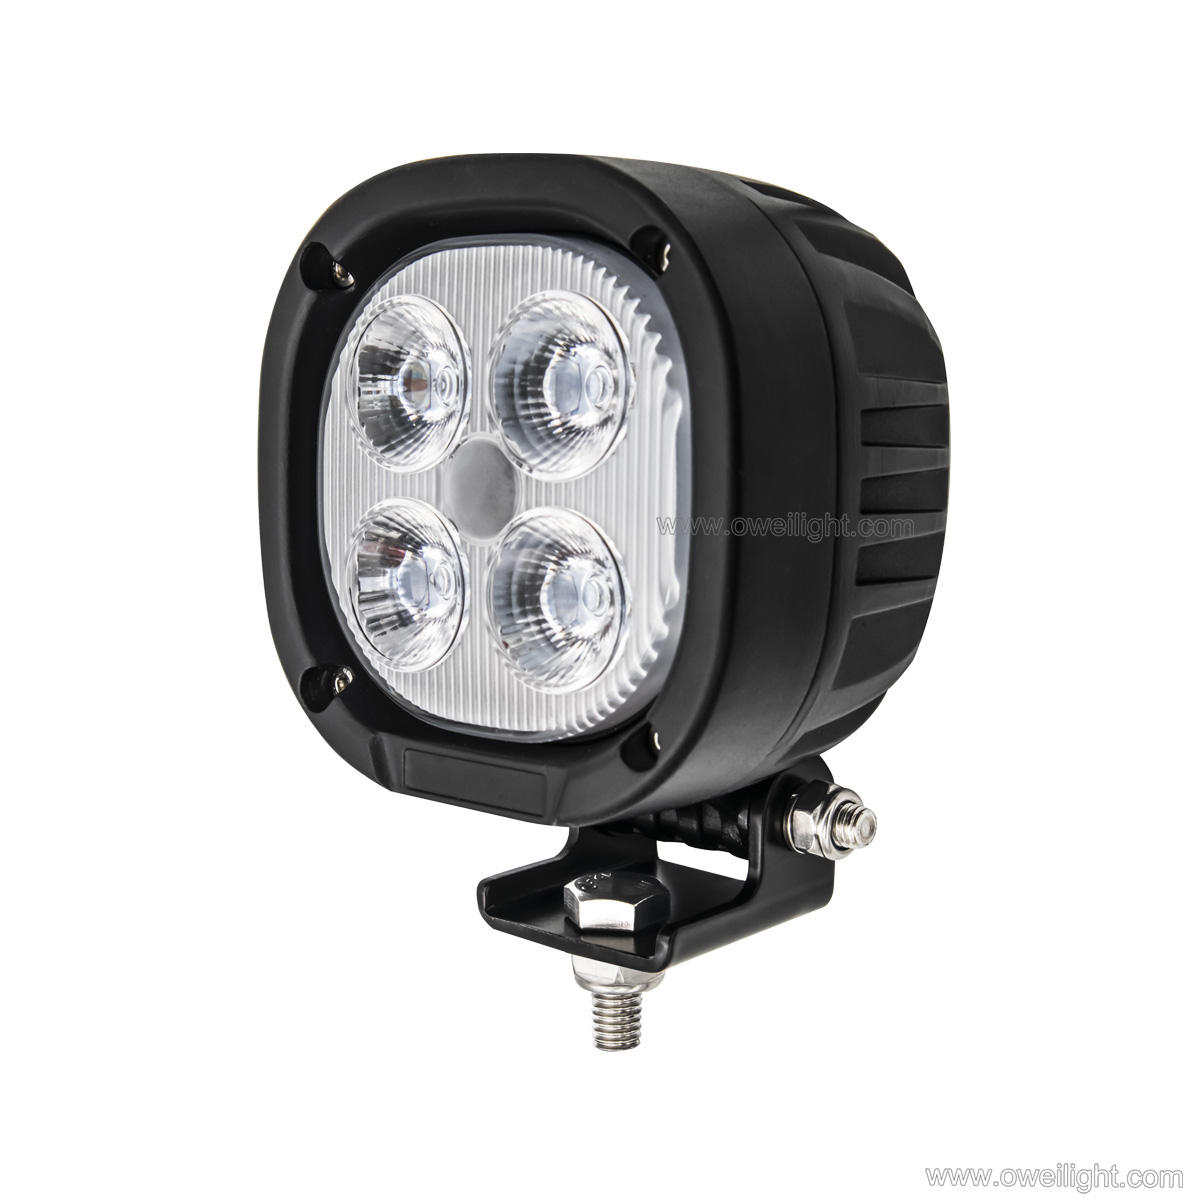 Agricultural Light - OW-4403-40W